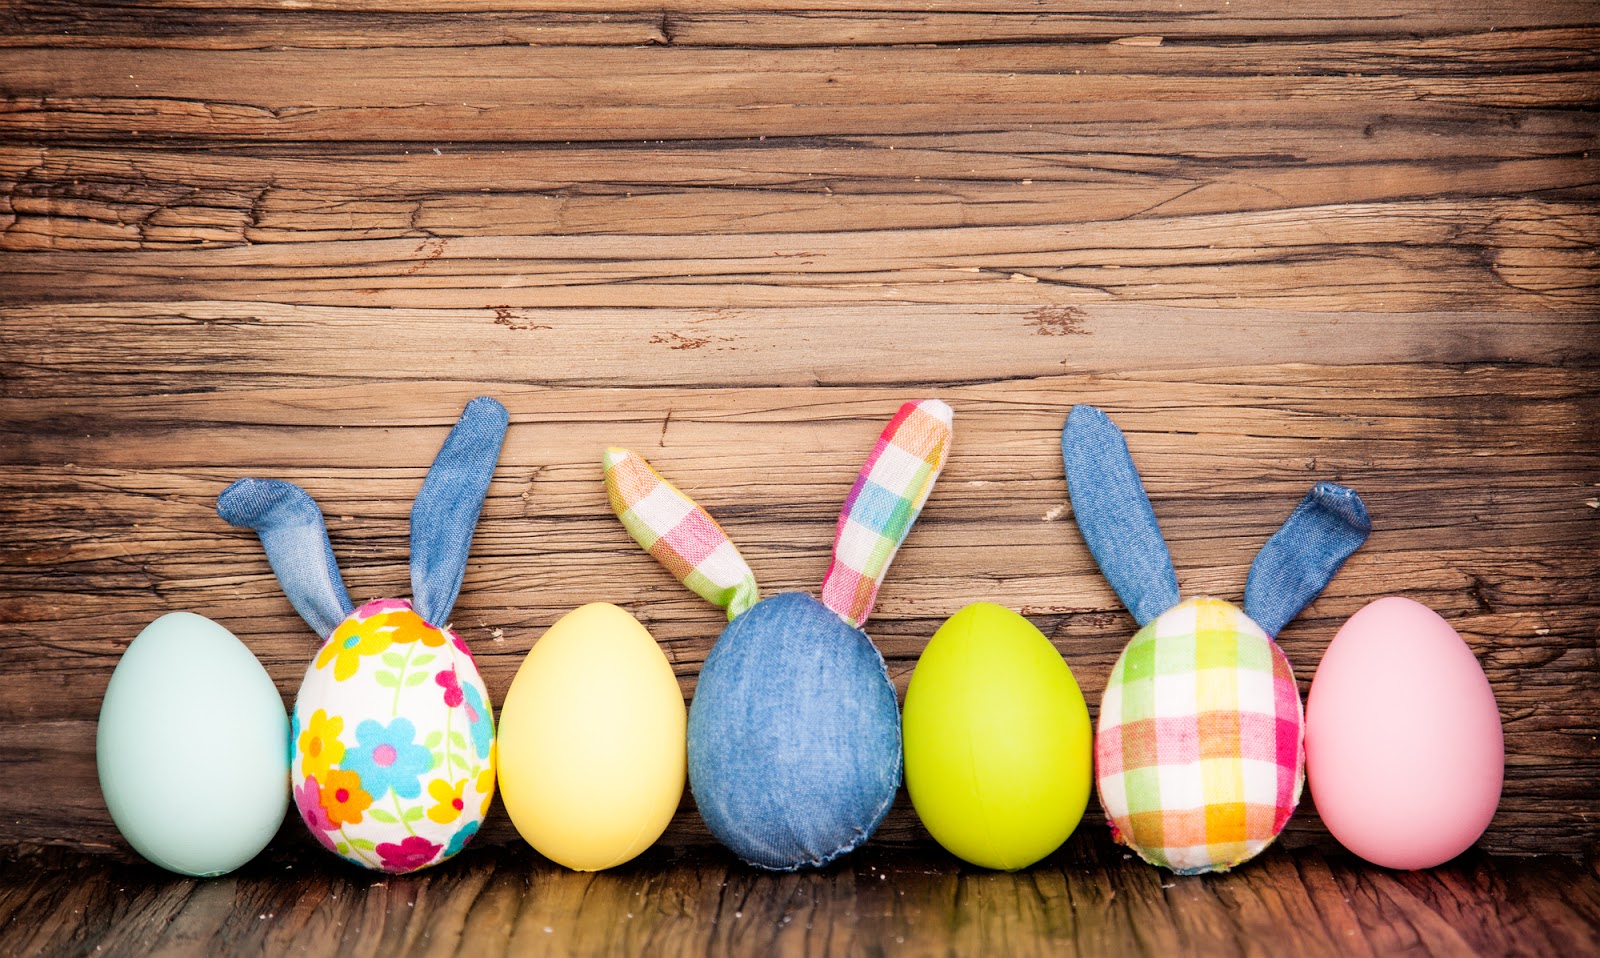 Top Blockchain “Easter Egg” Projects to Look Out For